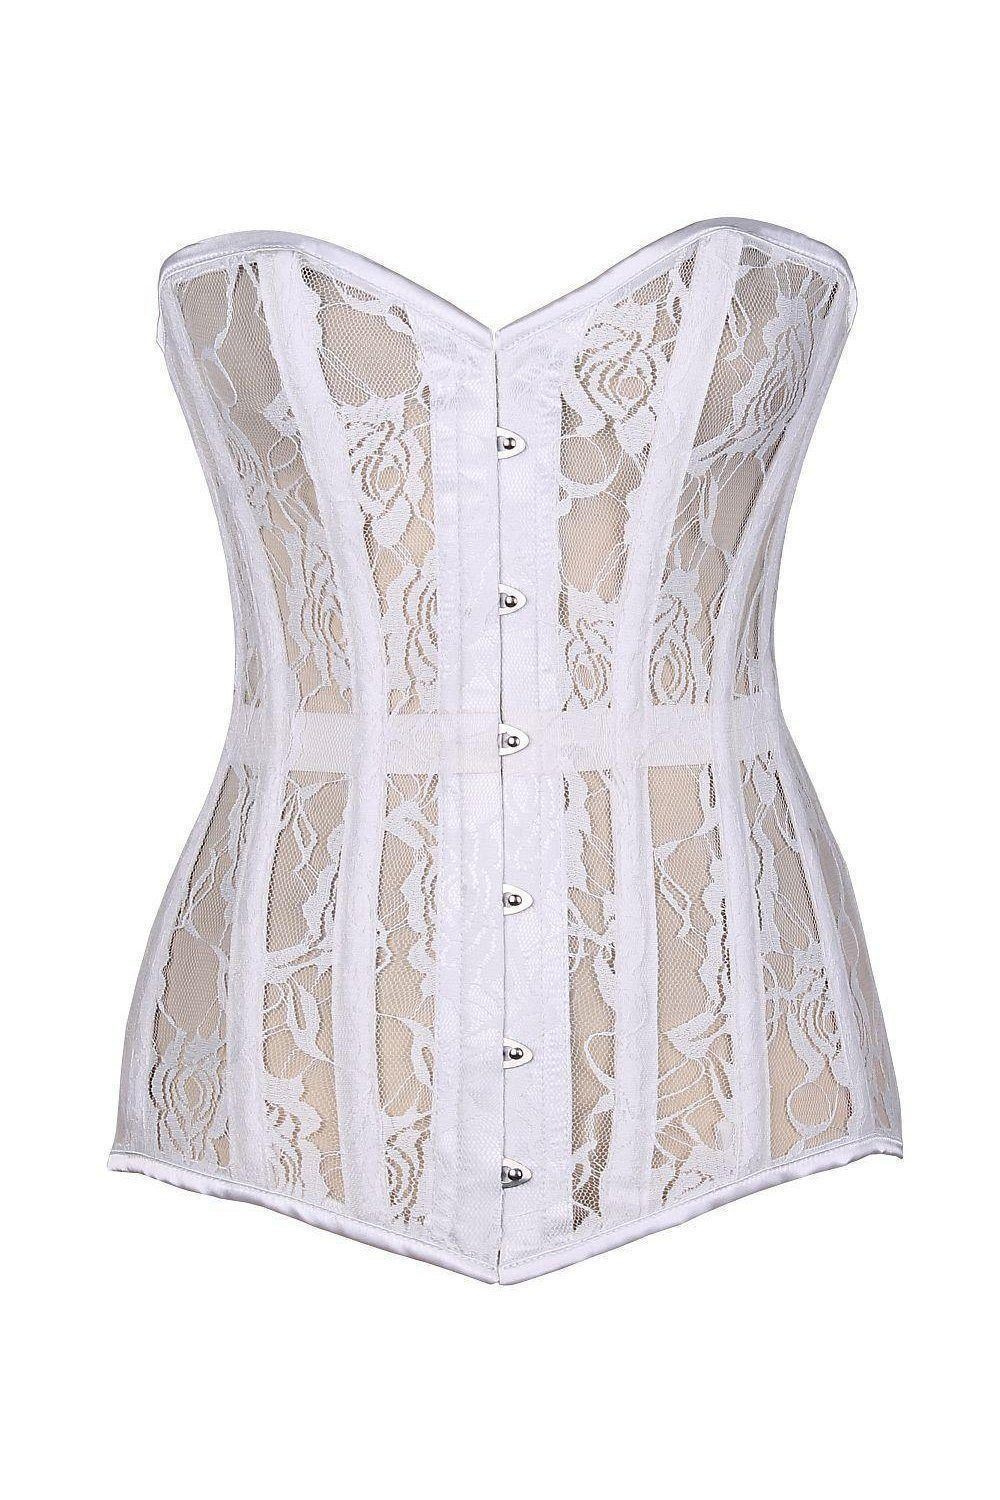 Lavish White Sheer Lace Over Bust Corset-Daisy Corsets-SEXYSHOES.COM